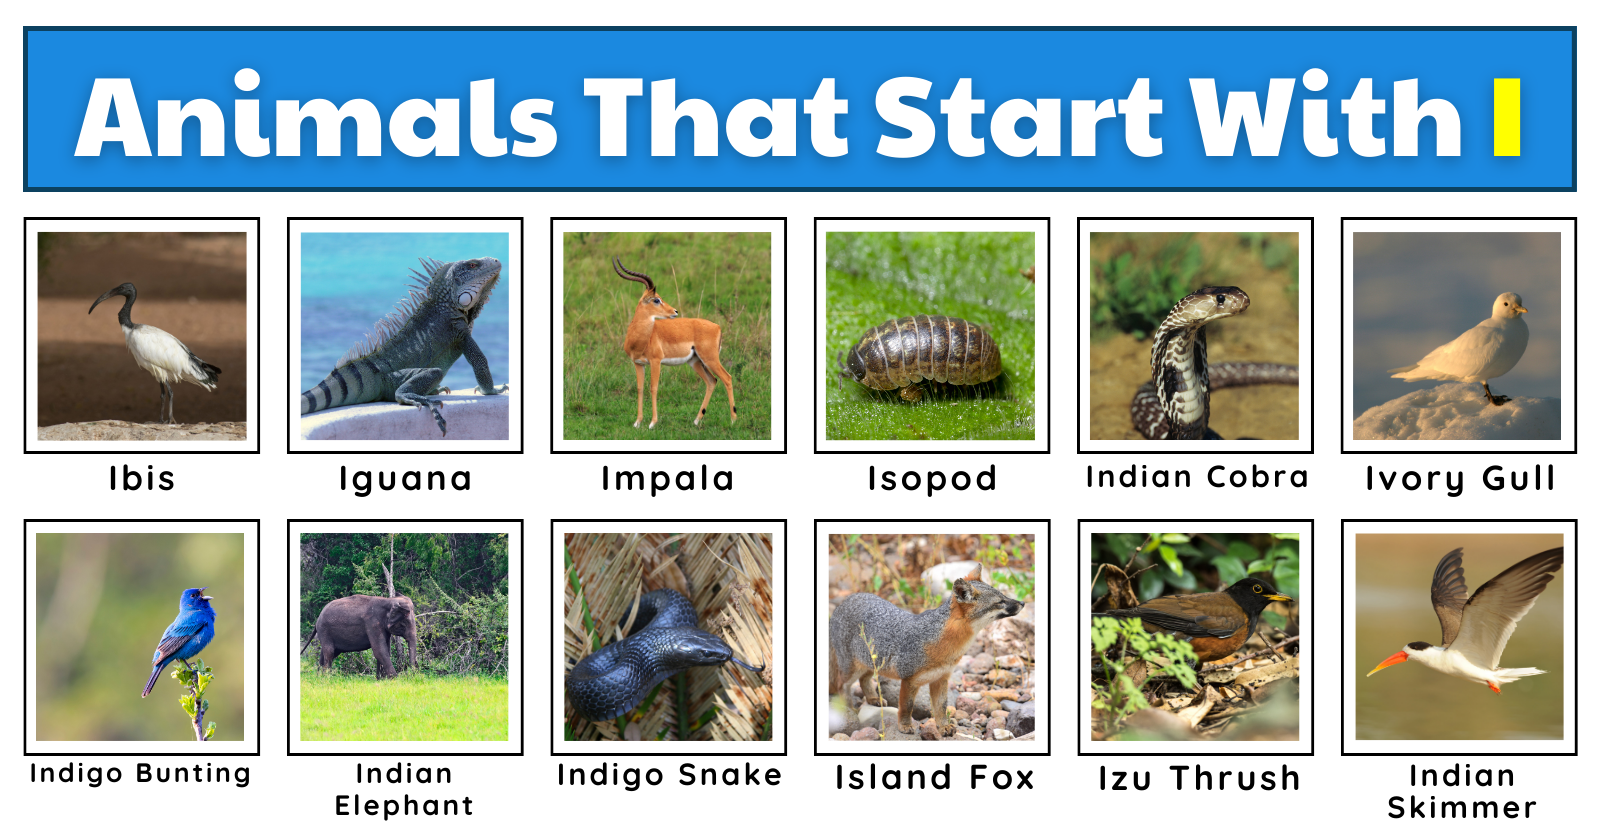 50 Incredible Animals That Start With I | List, Fun Facts, And A ...